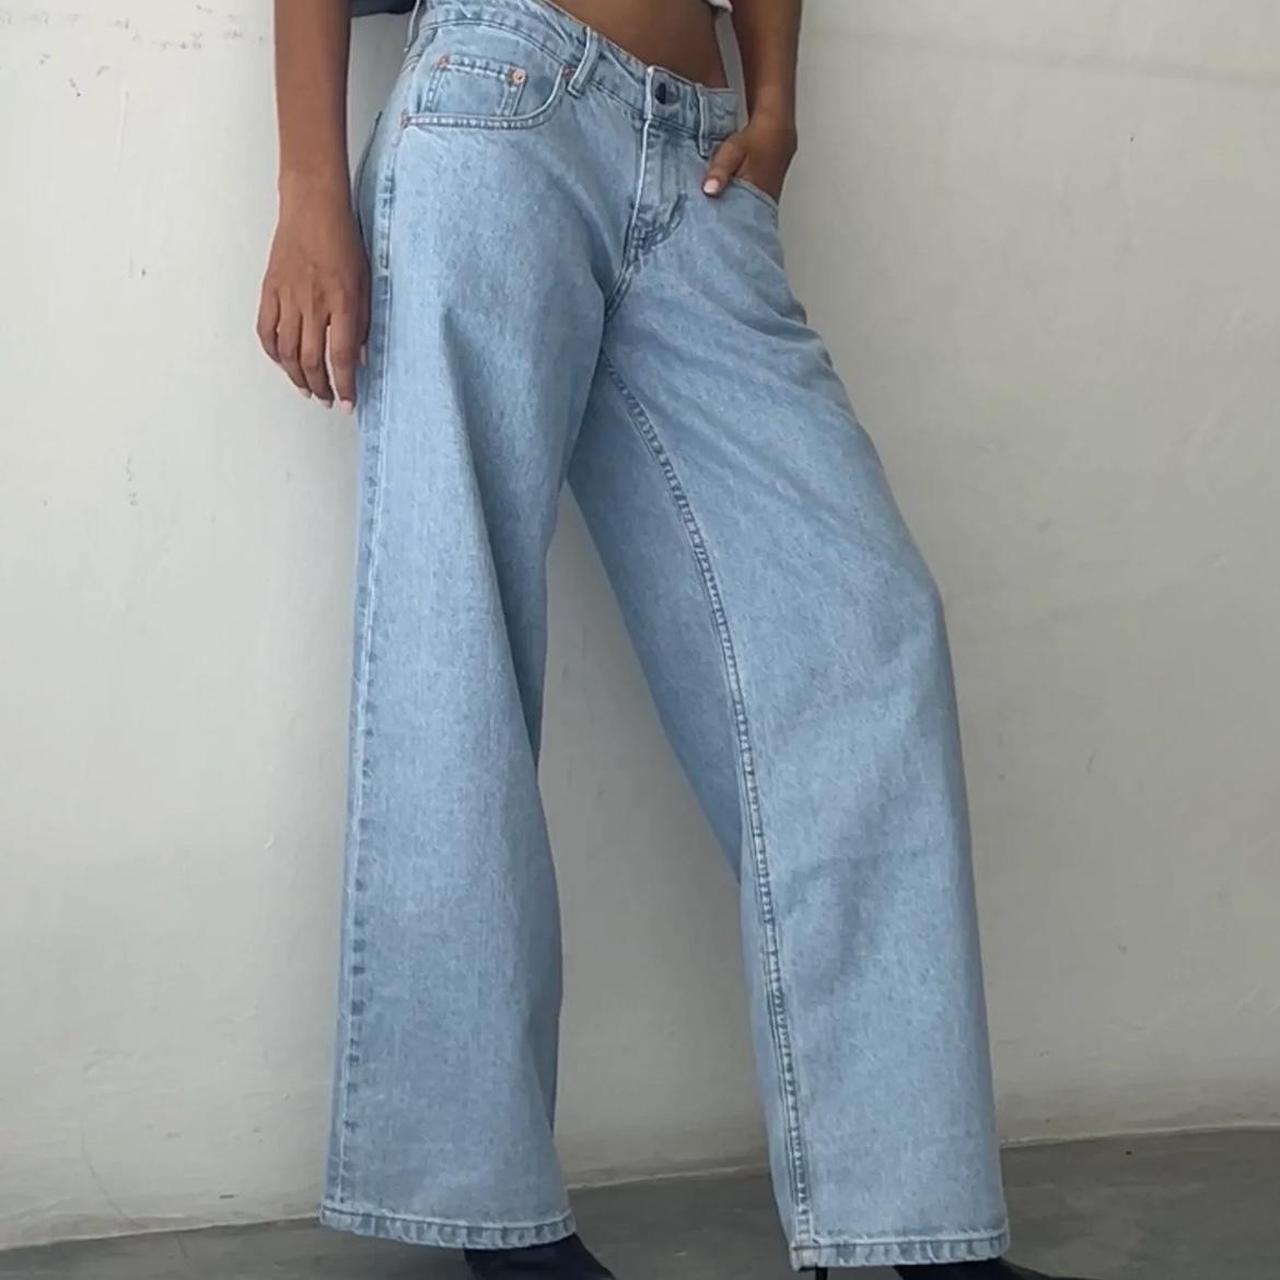 MOTEL roomy jeans 26 waist brand new with tags - Depop